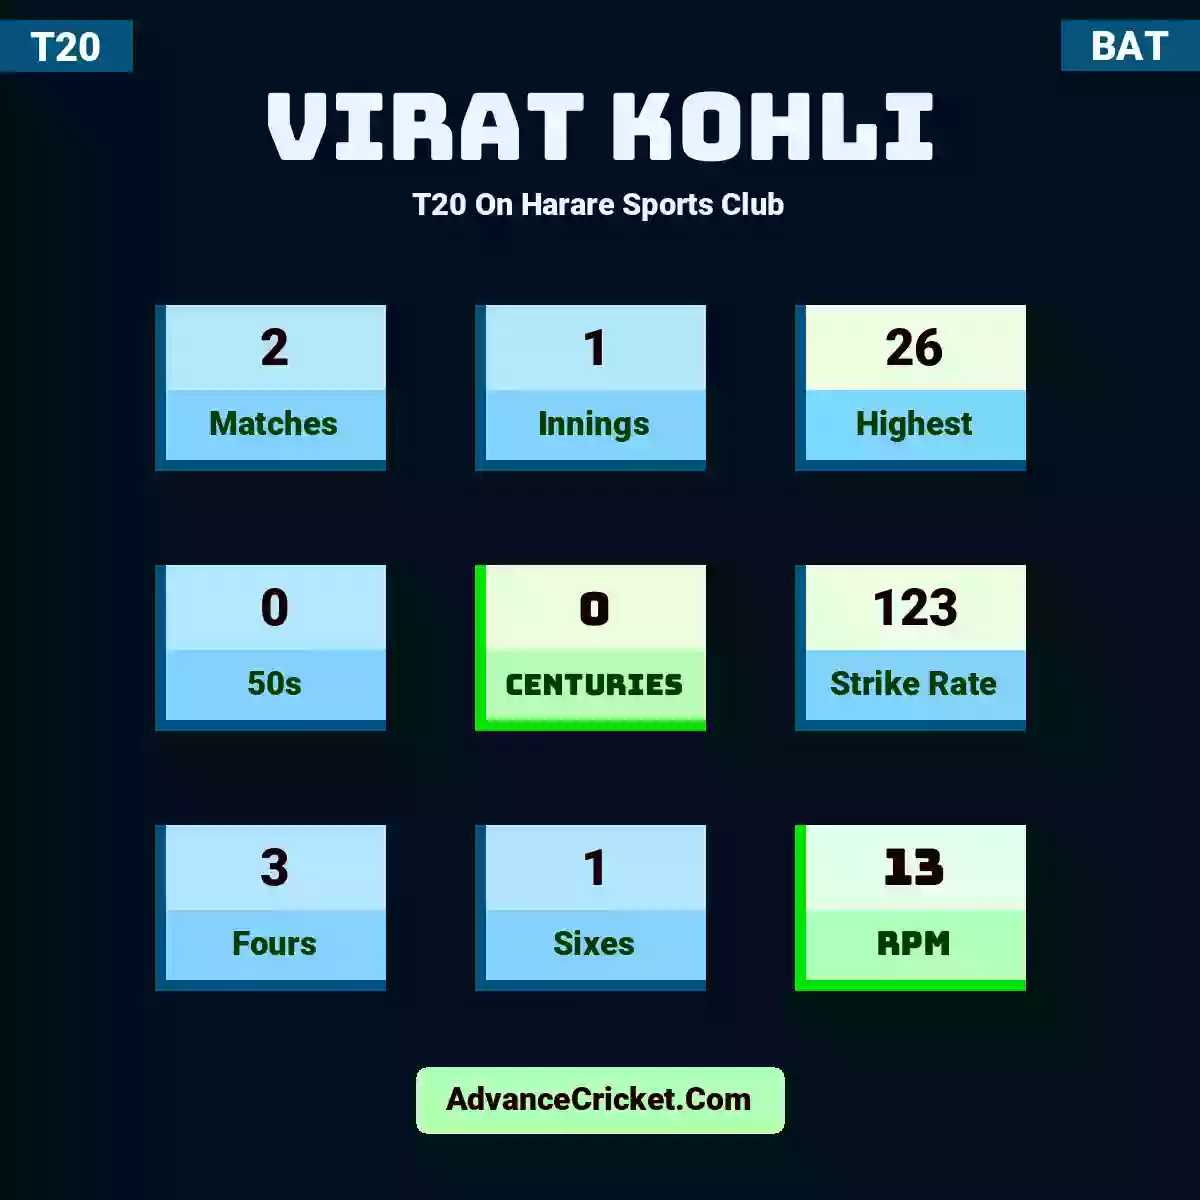 Virat Kohli T20  On Harare Sports Club, Virat Kohli played 2 matches, scored 26 runs as highest, 0 half-centuries, and 0 centuries, with a strike rate of 123. V.Kohli hit 3 fours and 1 sixes, with an RPM of 13.